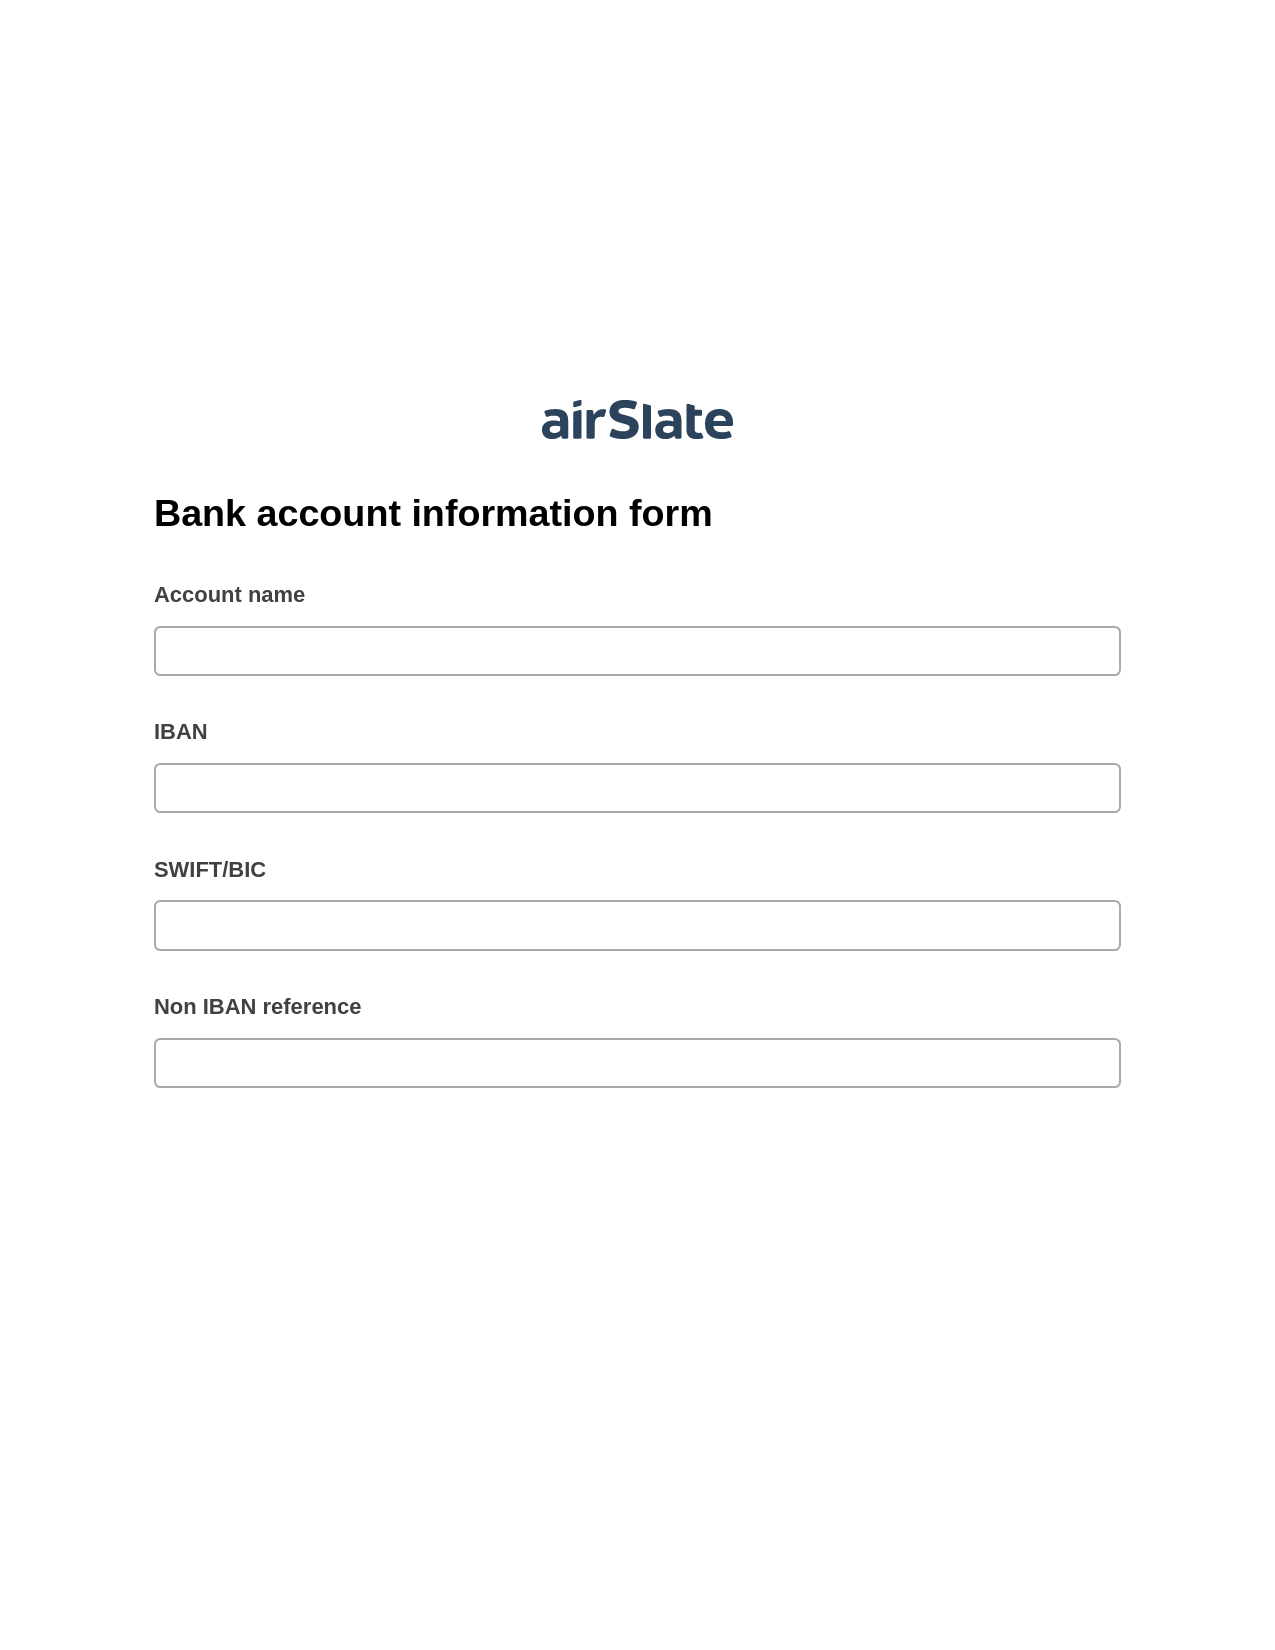 Bank account information form Pre-fill from Google Sheet Dropdown Options Bot, Mailchimp send Campaign bot, Archive to SharePoint Folder Bot